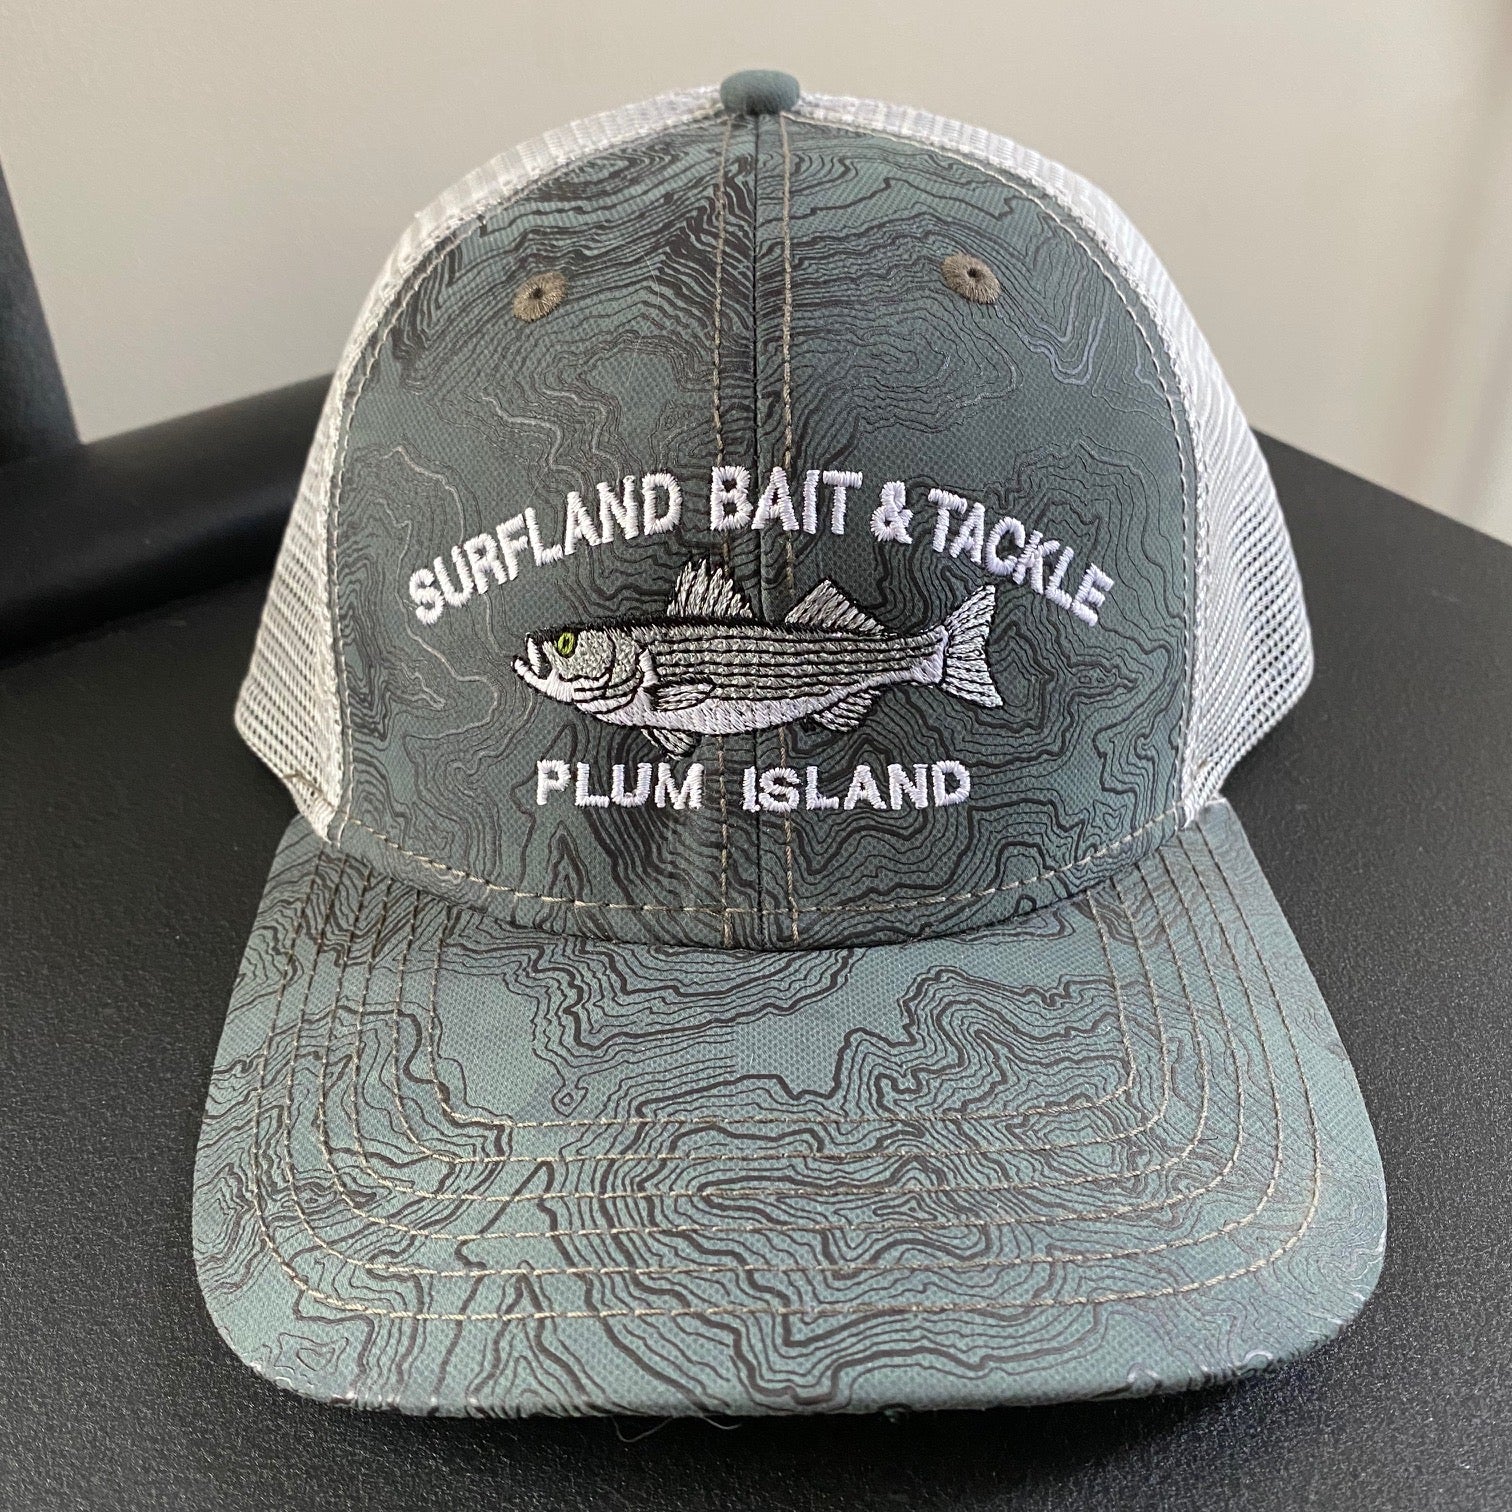 Surfland Gear - Dri-Duck Territory Trucker Cap – Surfland Bait and Tackle